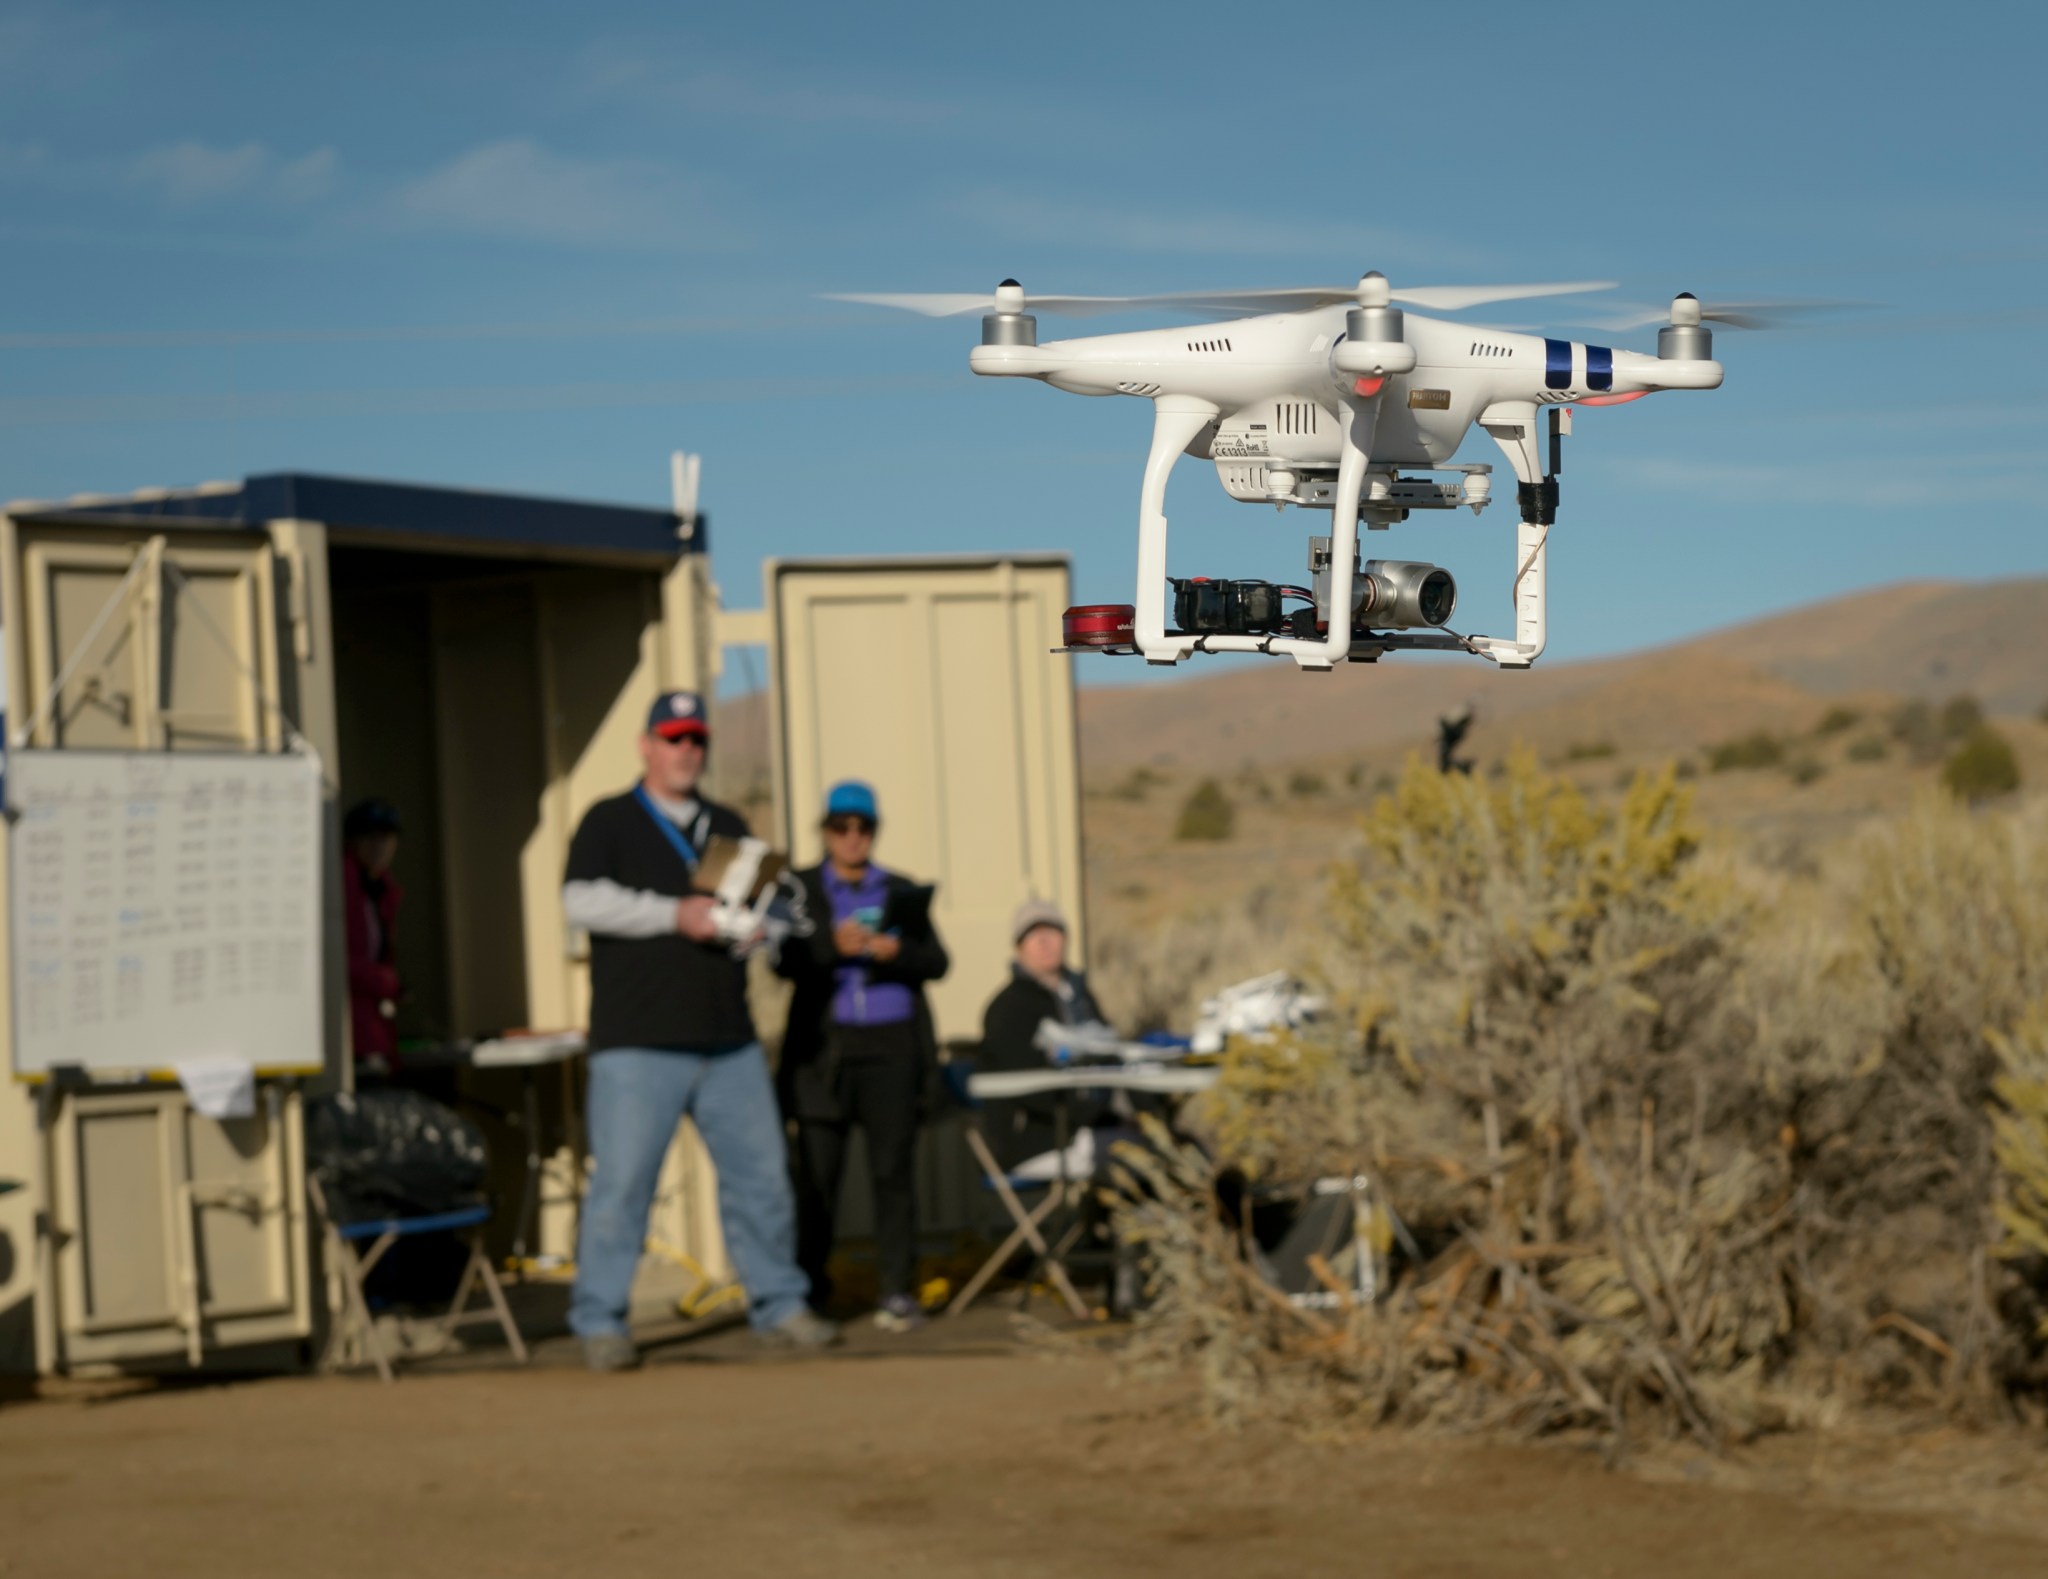 A Phantom 3 multi-copter is flown during a Technology Capability Level mission at Reno-Stead Airport in Reno, Nevada.